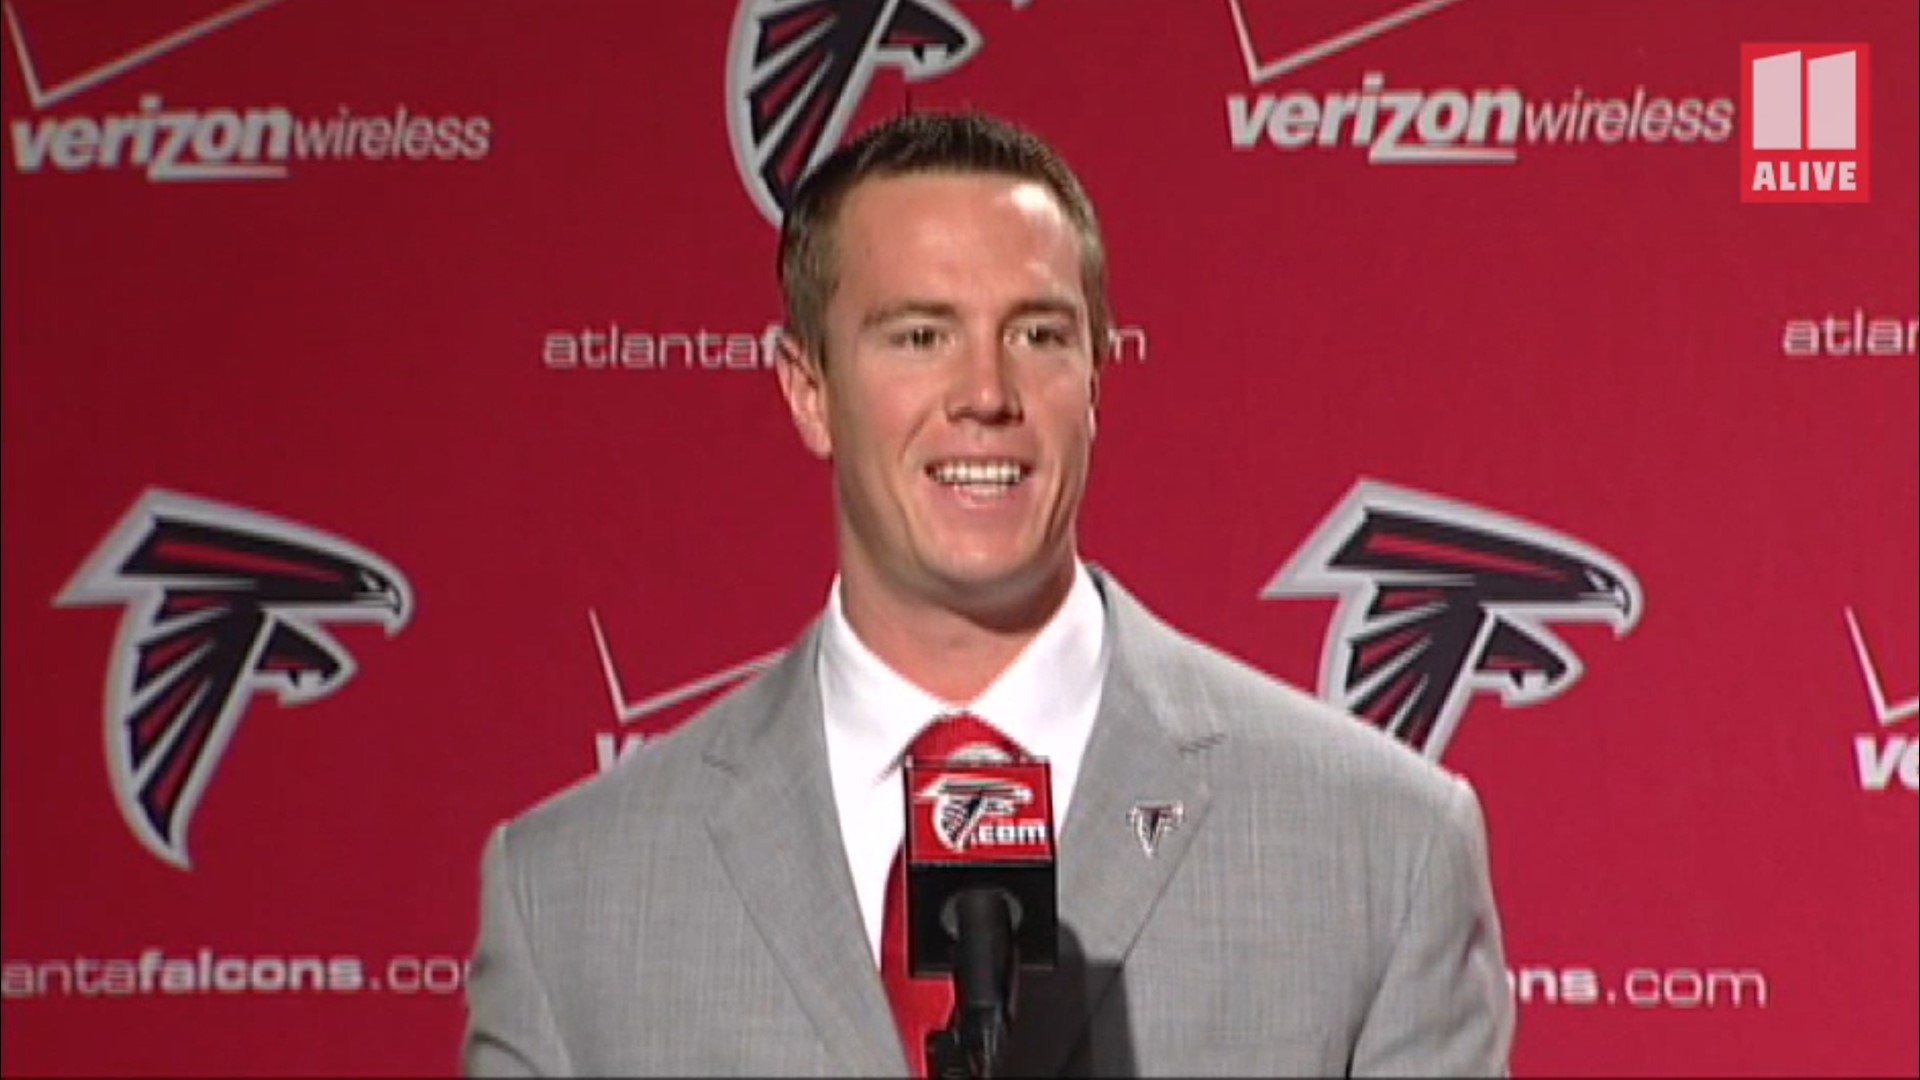 Take a look back at Matt Ryan as he was introduced to the Atlanta Falcons following the 2008 NFL Draft.